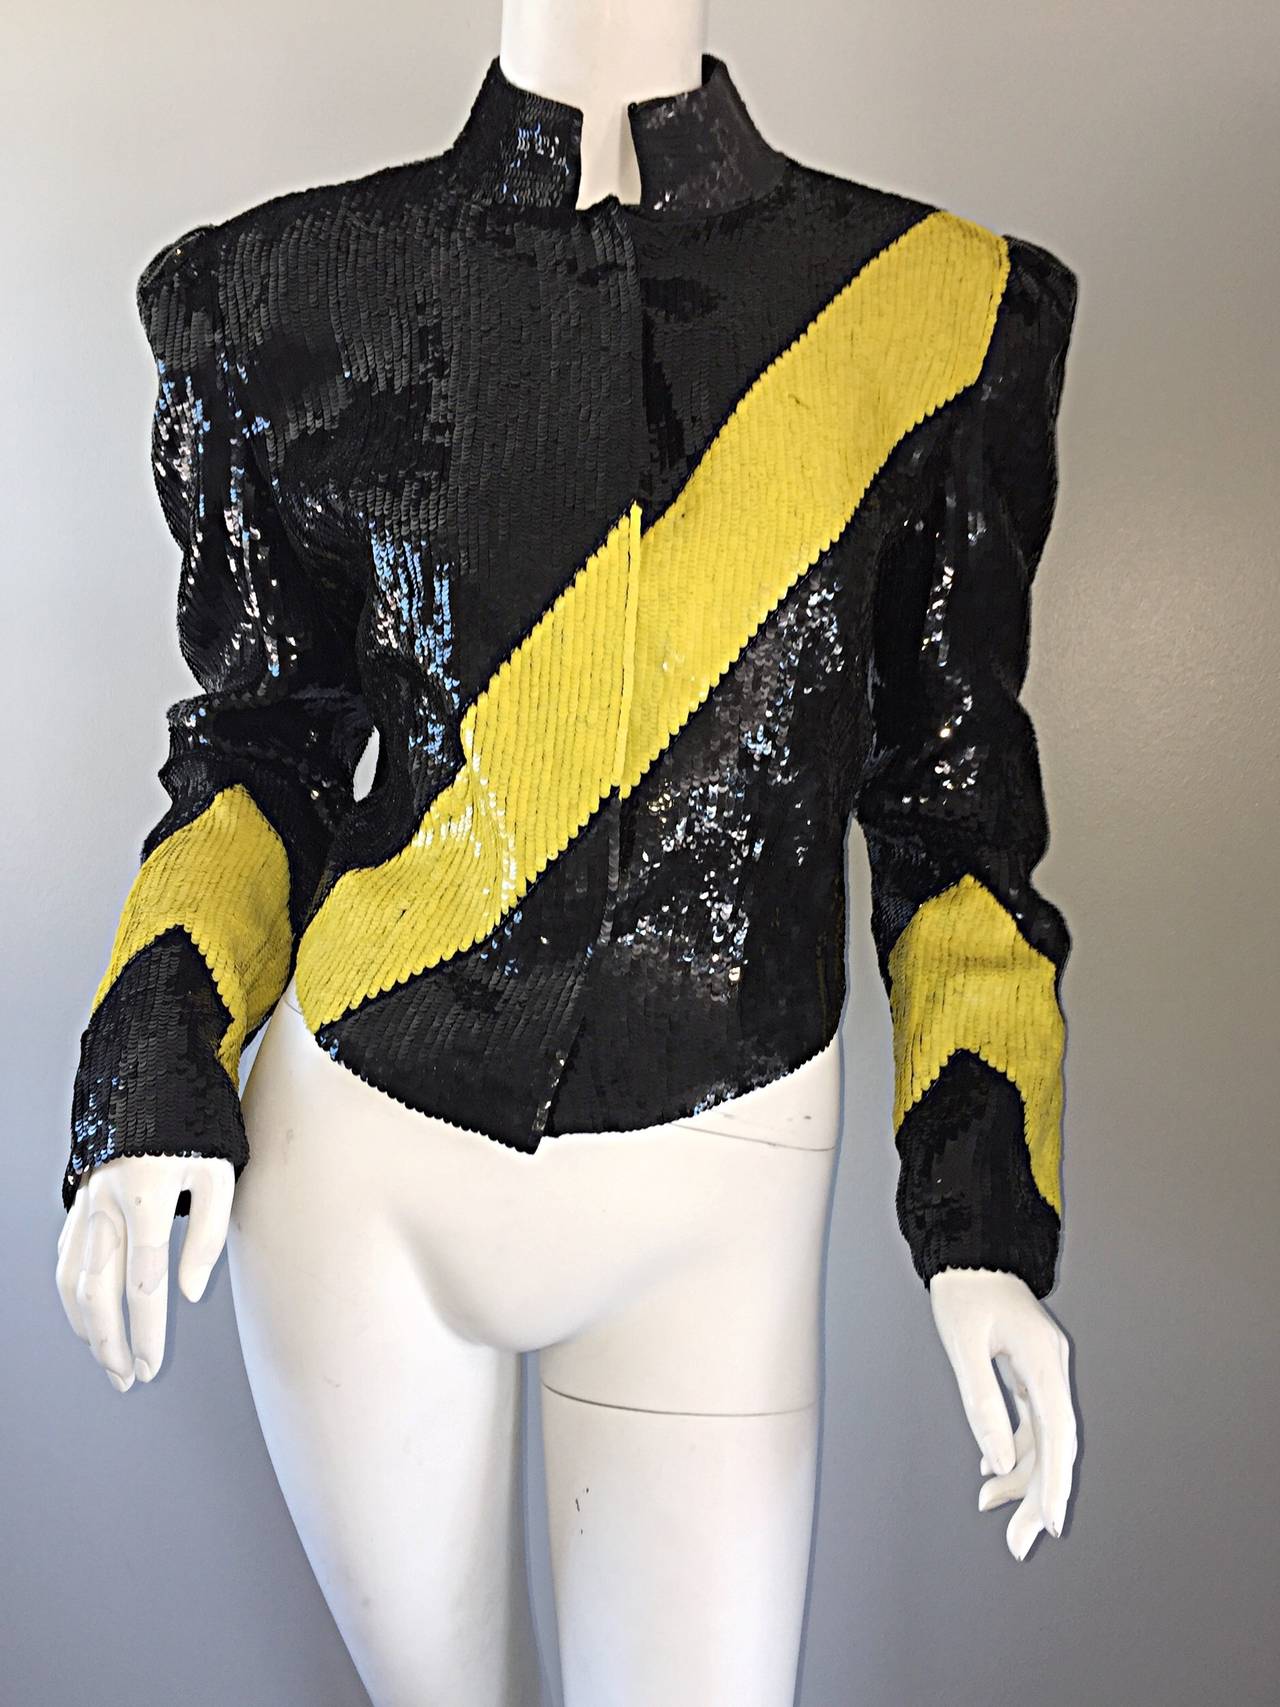 My FAVORITE jacket EVER!!! Vintage Carolina Herrera SUPER RARE all-over sequin jacket! 'Caution Tape' style, with an Avant Garde flare! Chic mandarin collar. Can easily transition from day to night...Loos great with jeans, yet effortlessly chic